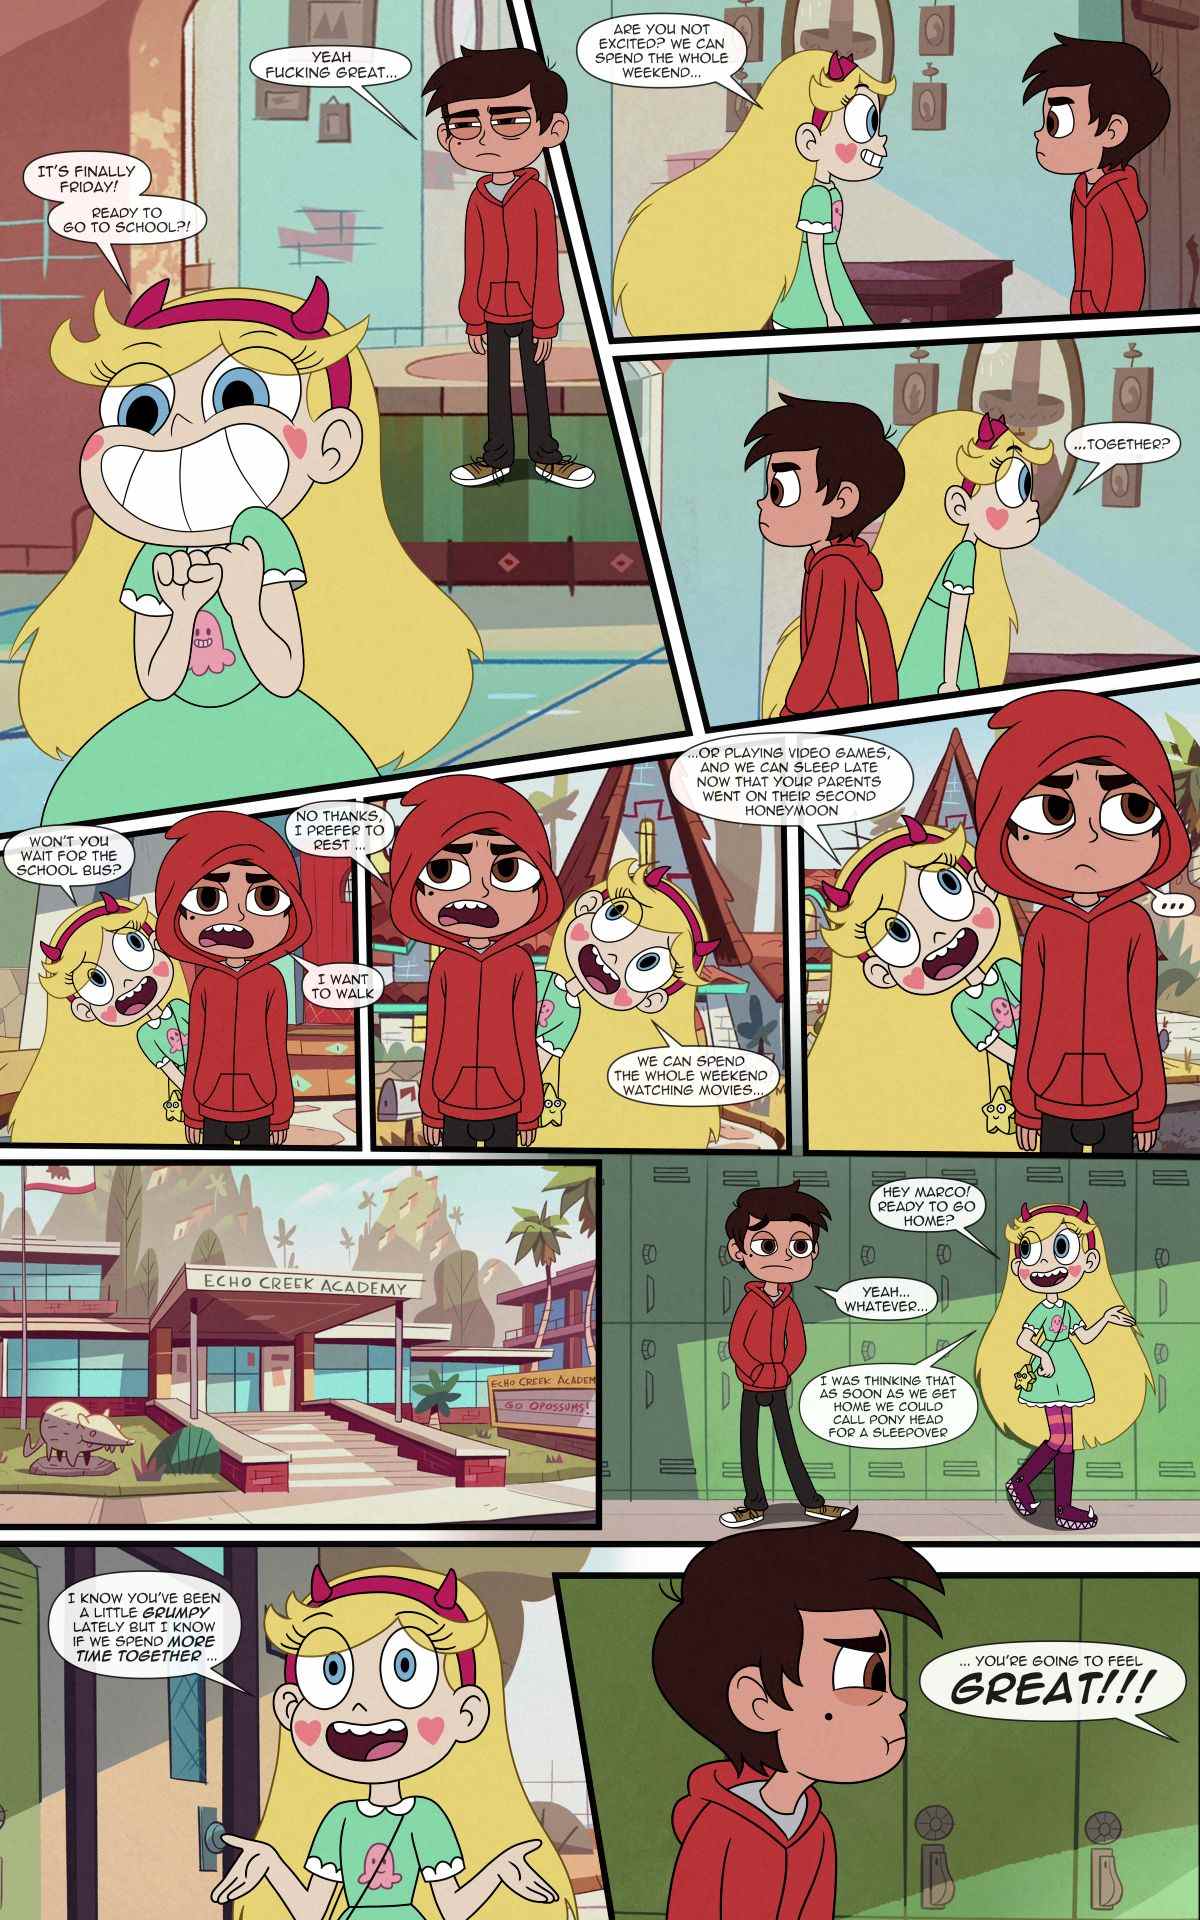 Star Butterfly Porn Comic Pool - Time Together (Star vs. The Forces of Evil) Broshogun - Comics Army